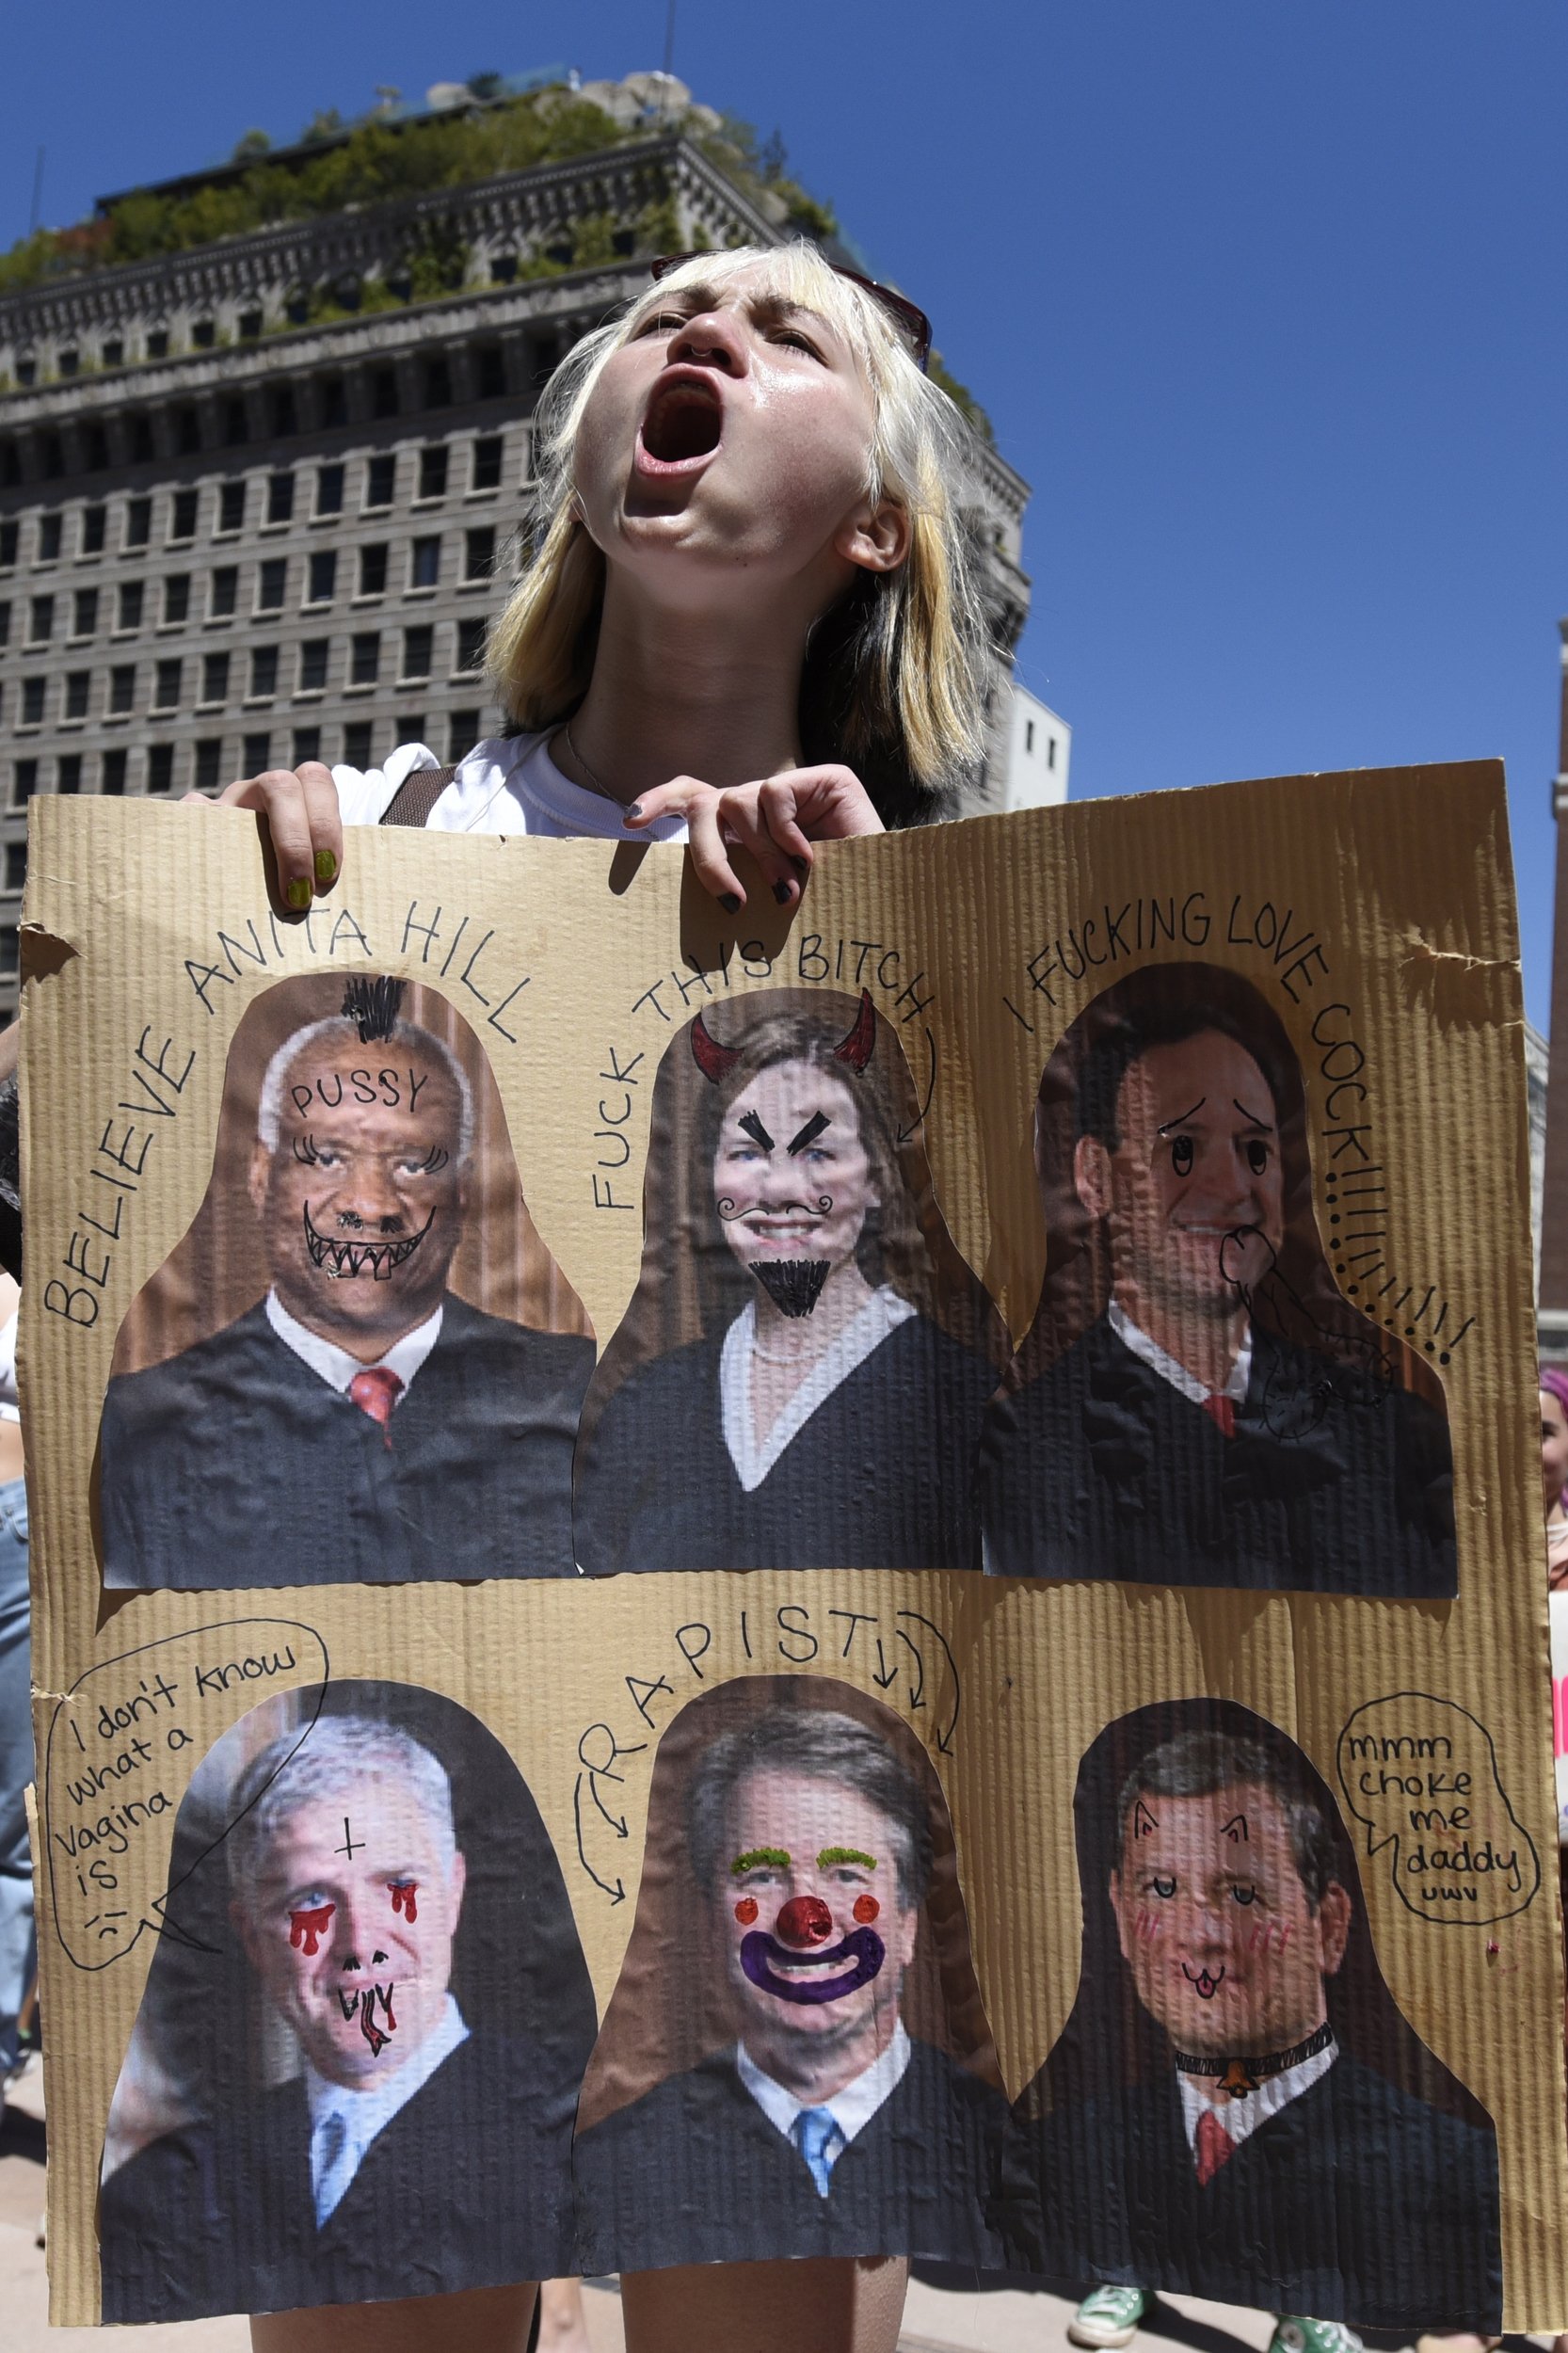  A young woman protests the decision with a handmade sign. 